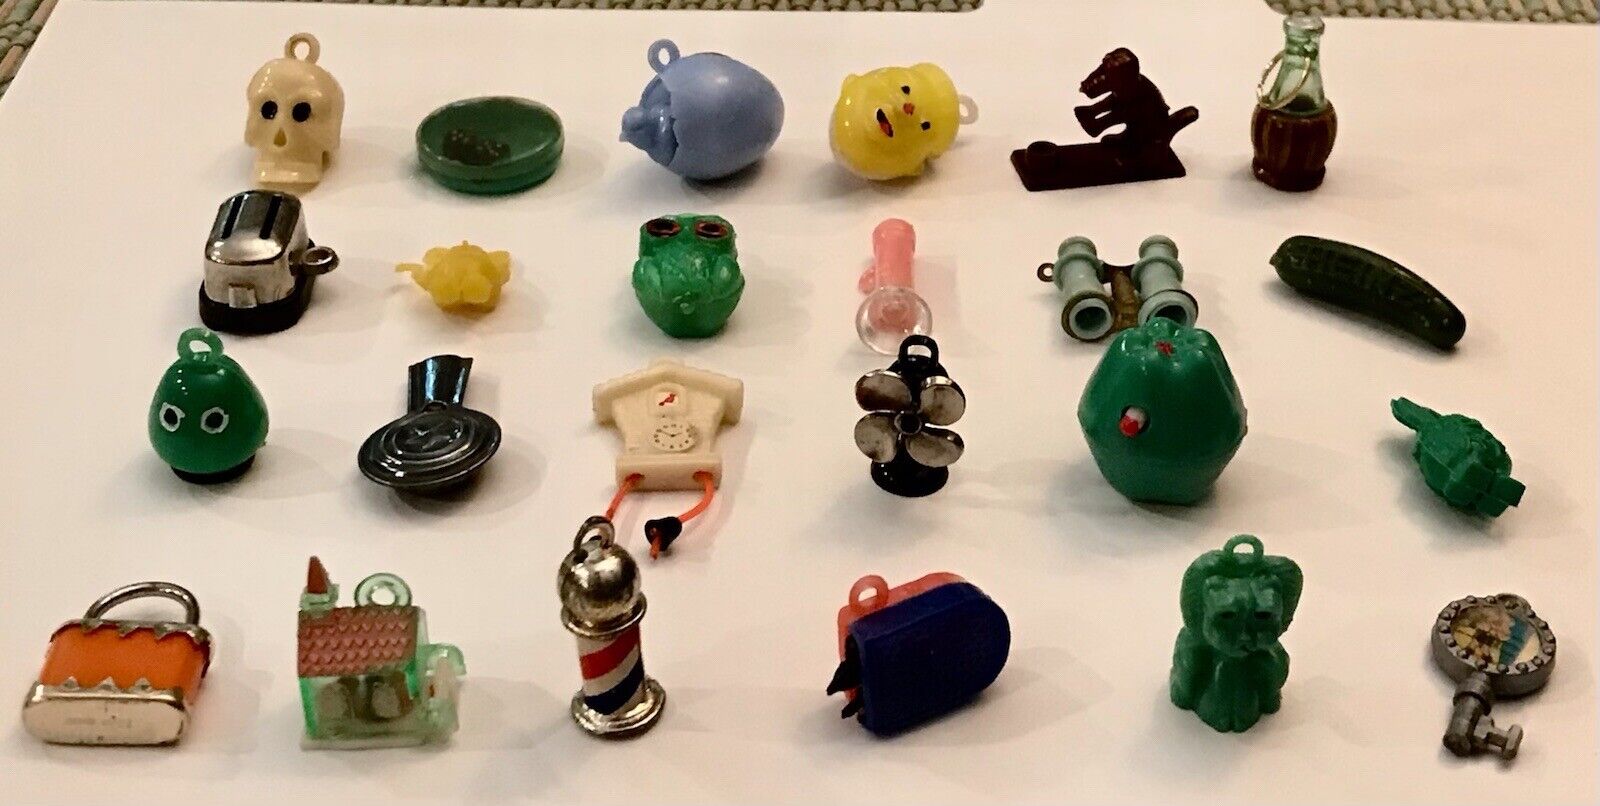 24 Rare Vintage Gumball Charms Cracker Jack Prizes Many Mechanicals/Kobe Wow